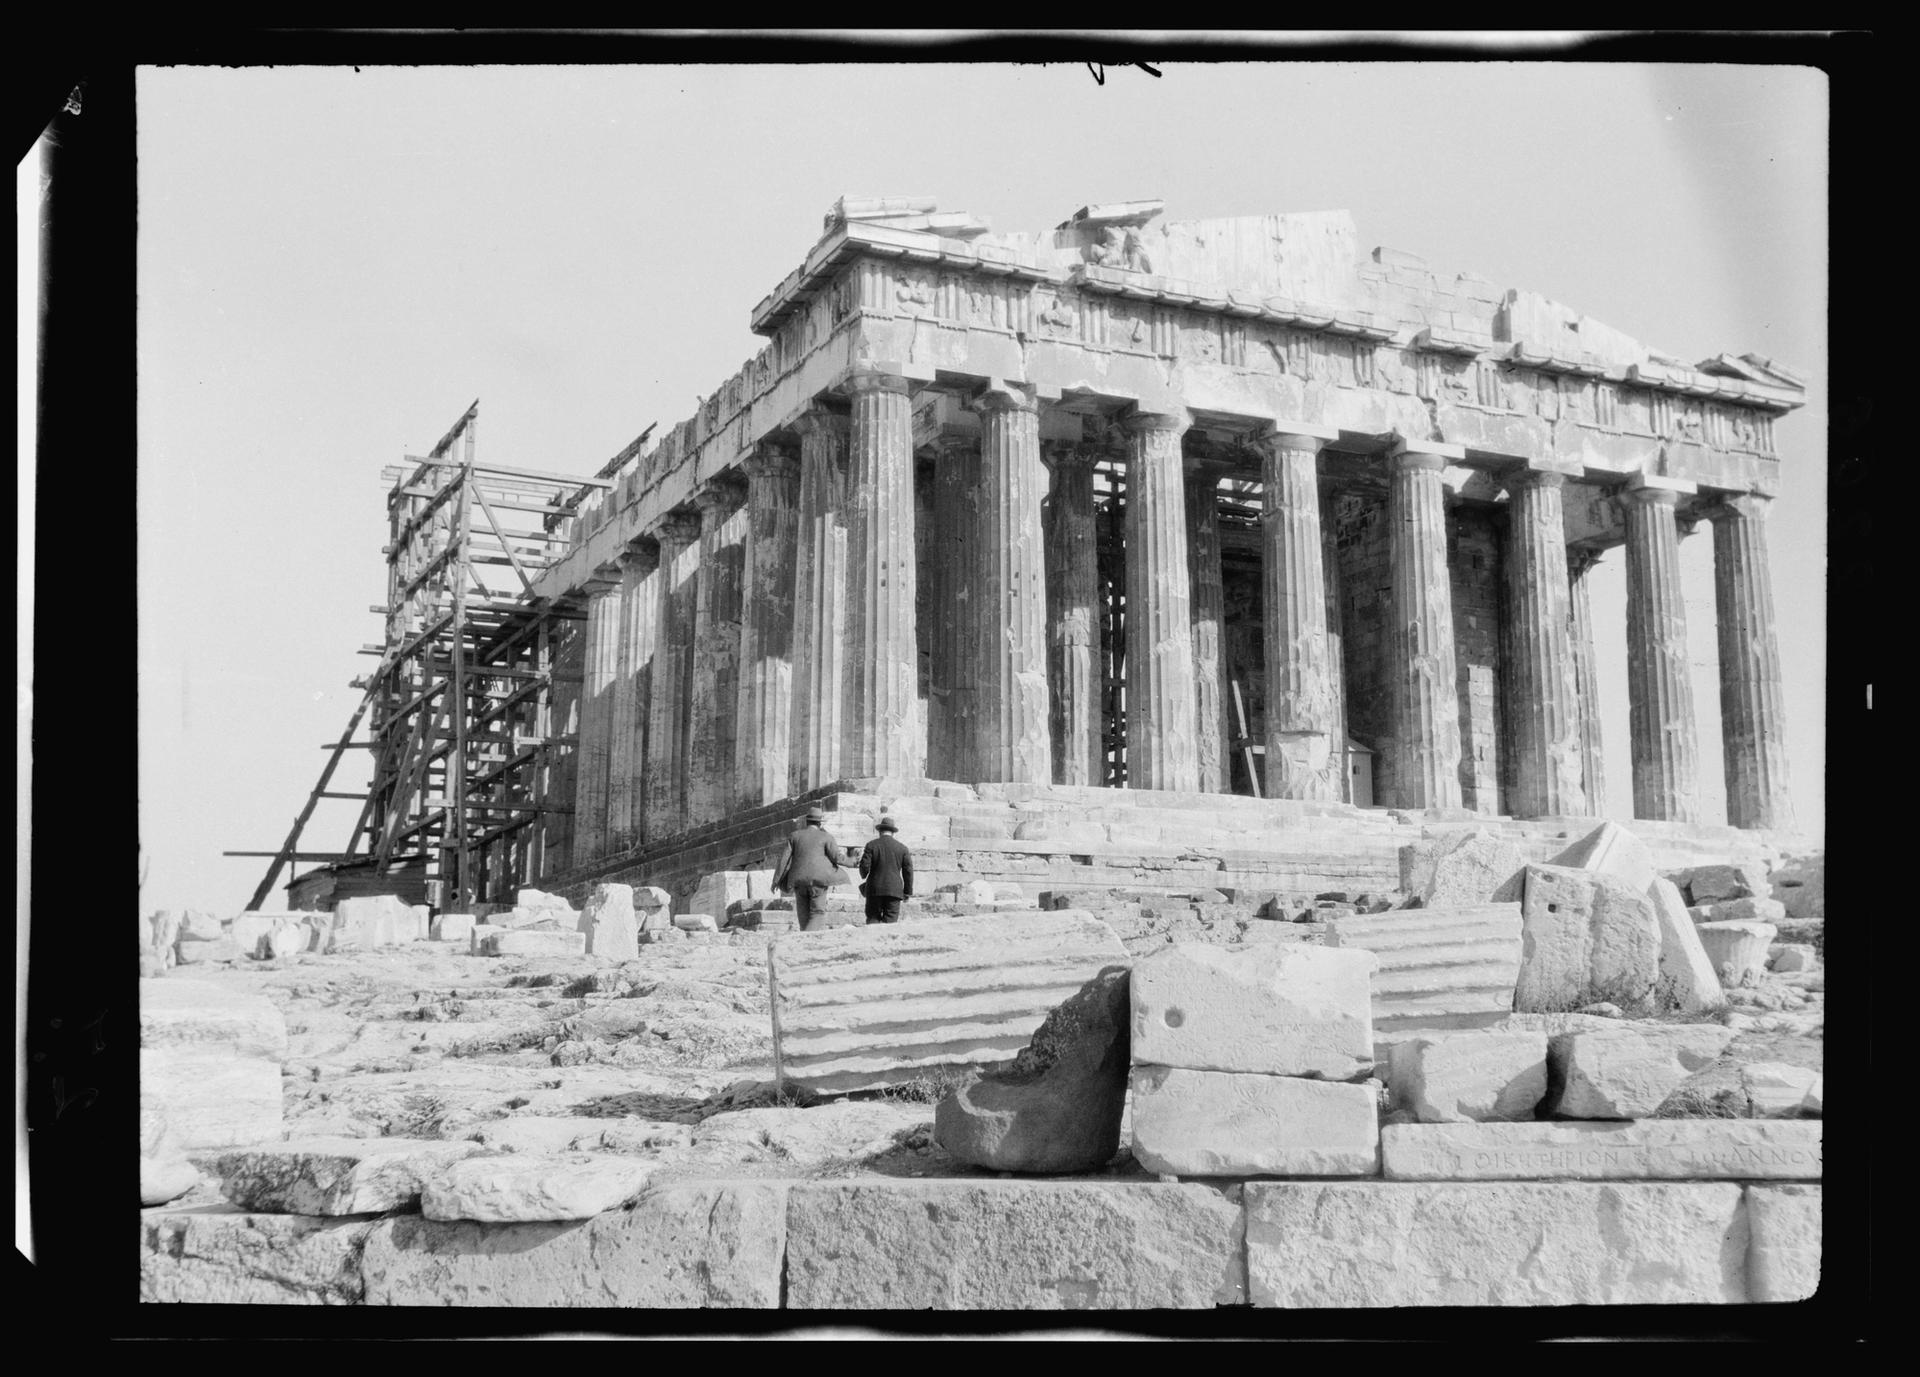 The Parthenon in Athens, Greece, around 1900-20 Photo: Library of Congress Prints and Photographs Division Washington, D.C. 20540 USA